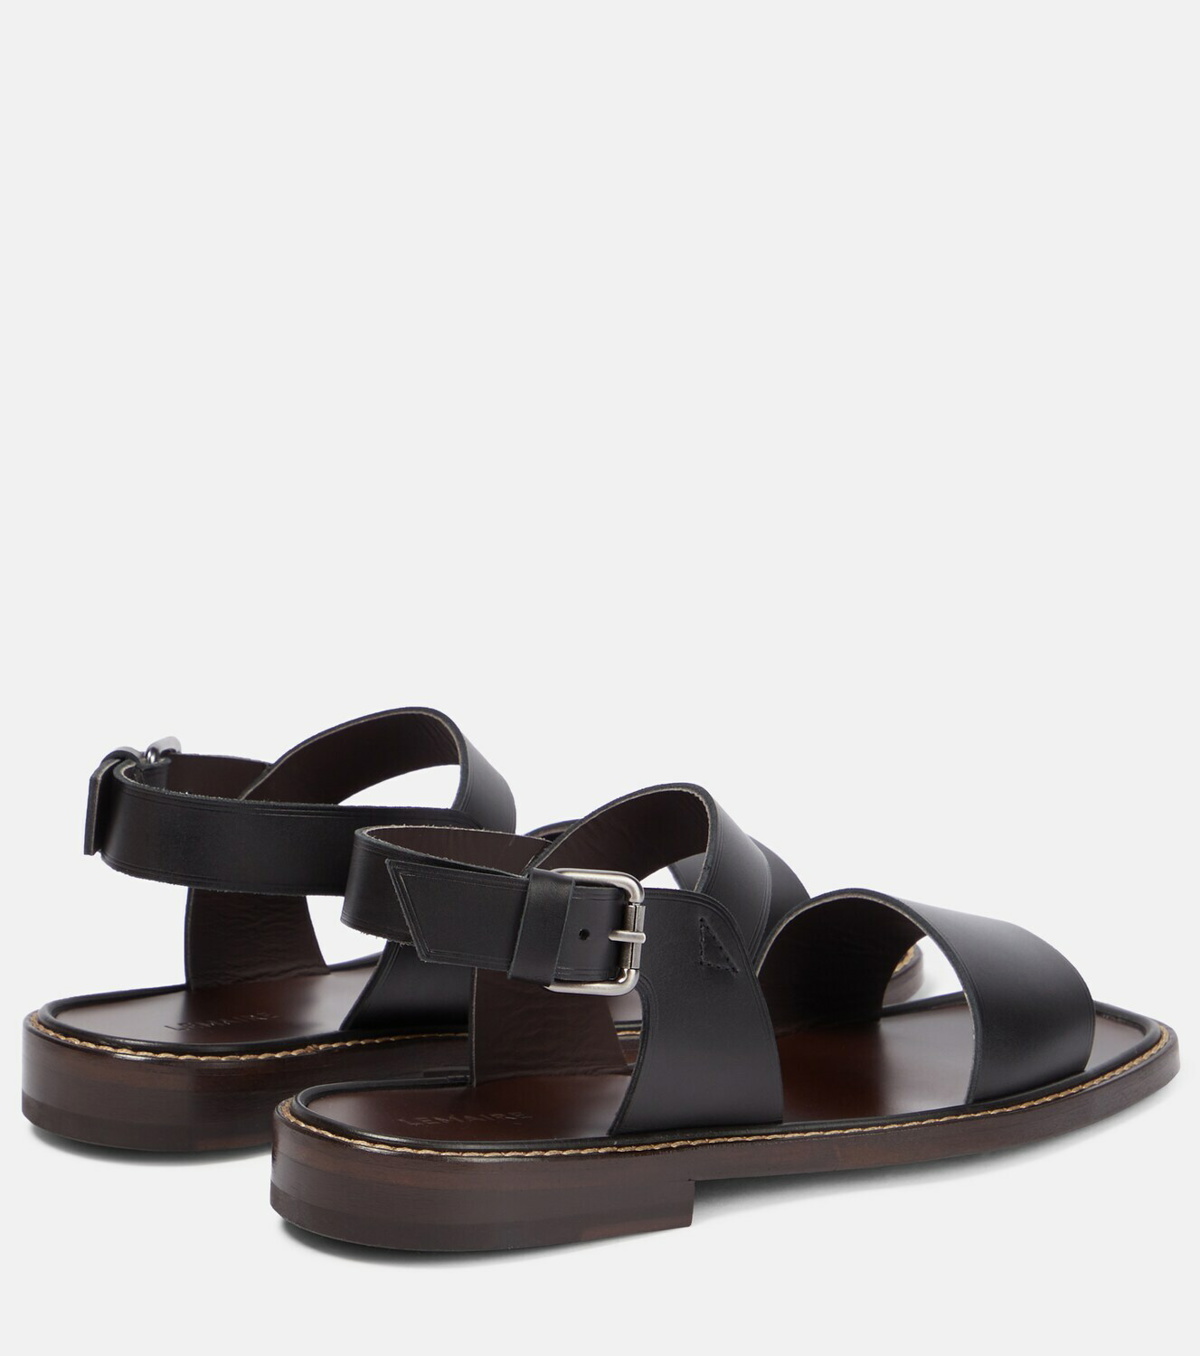 Lemaire - Classic leather sandals Lemaire